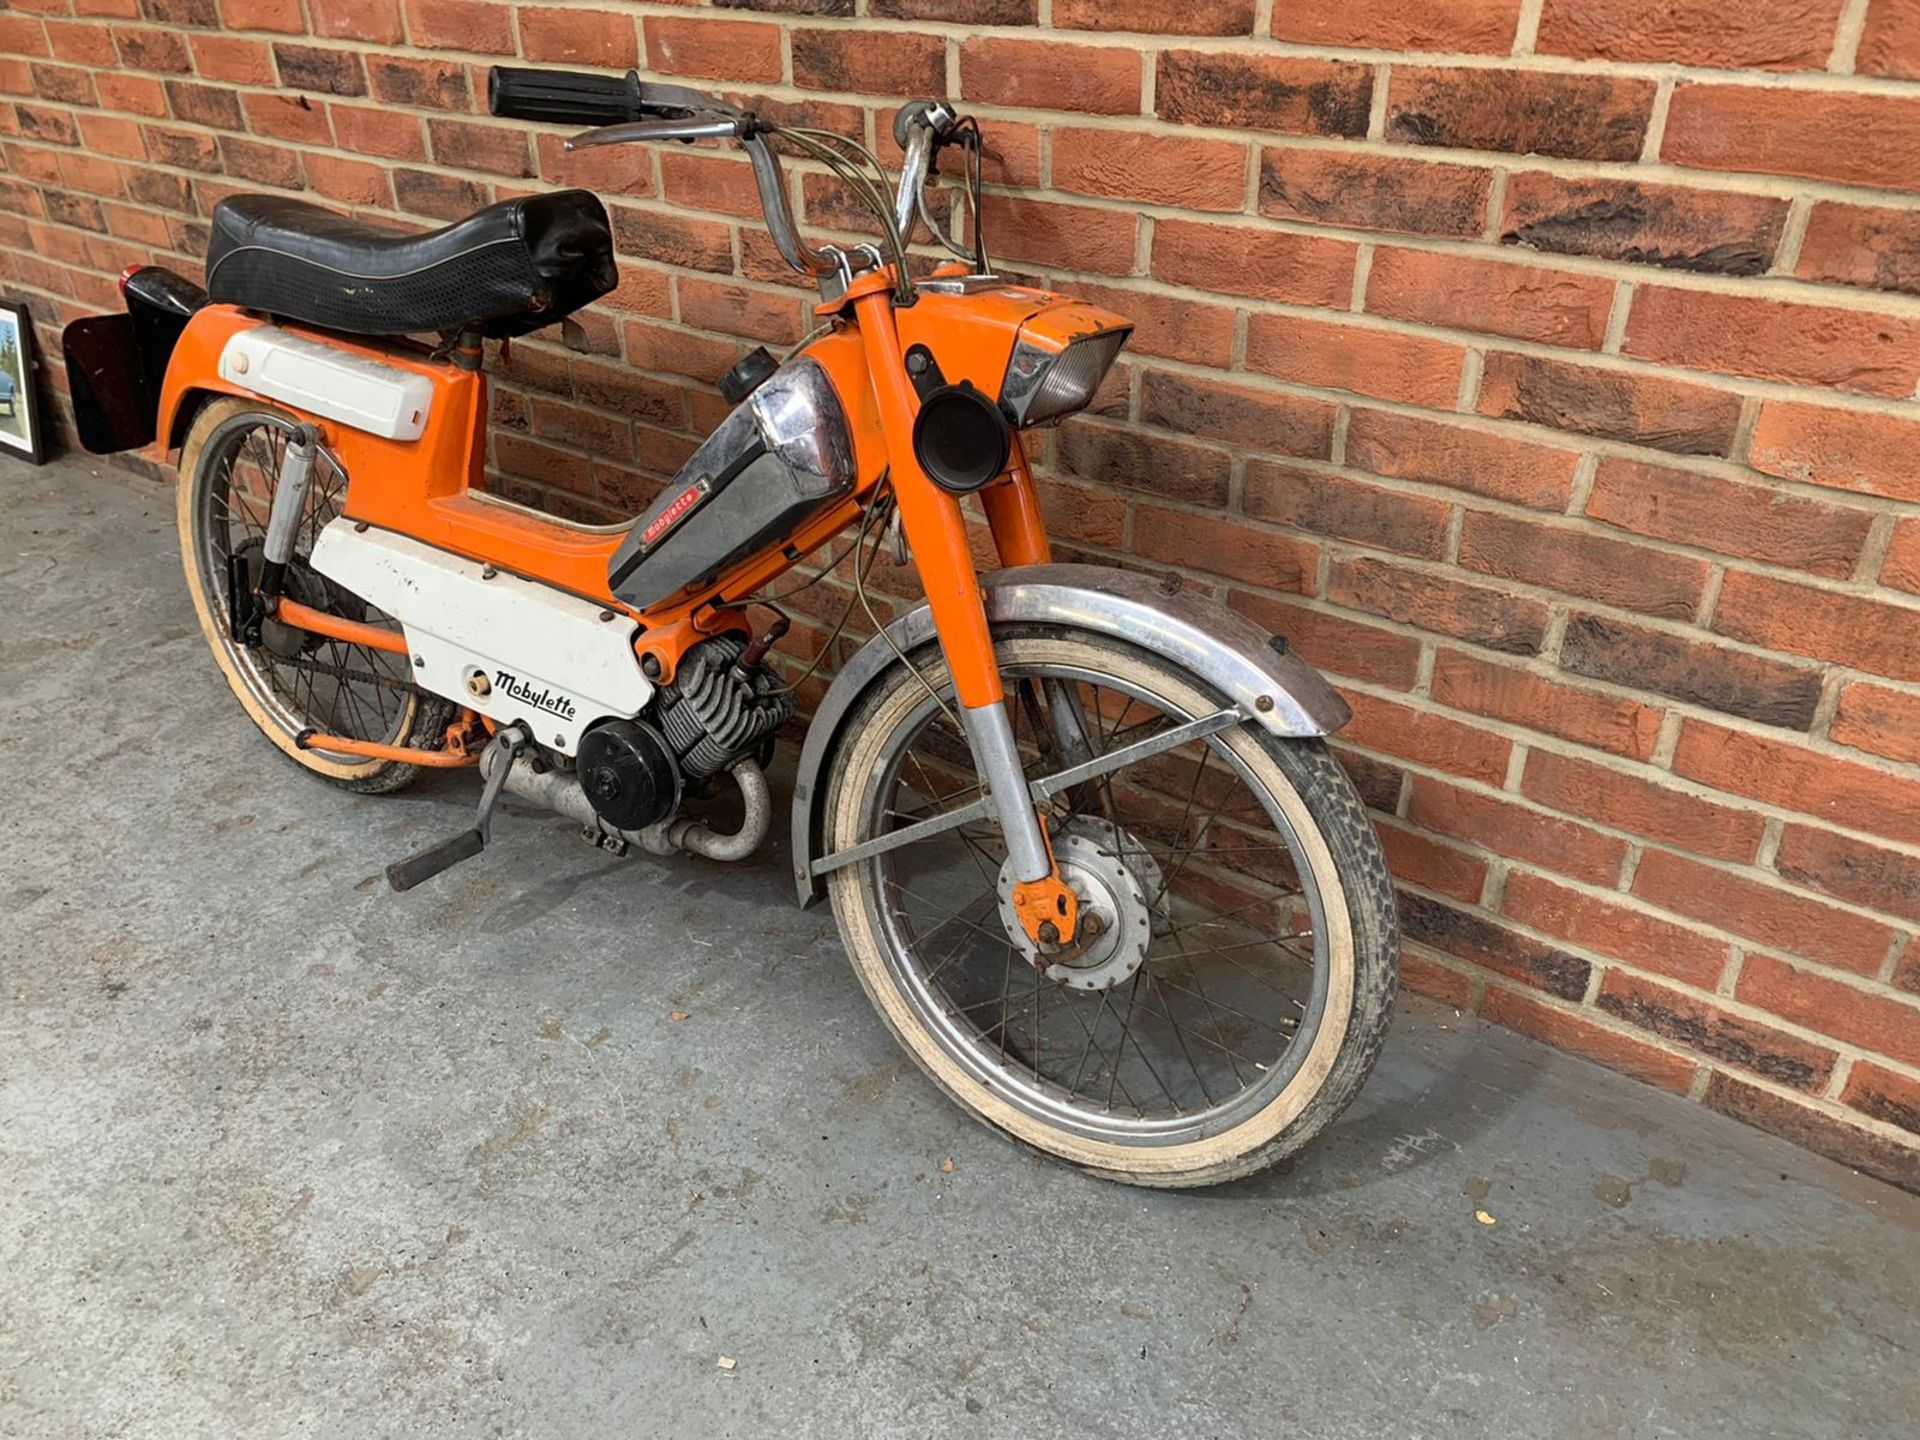 1974 Mobylette 49cc Moped for restoration - Image 5 of 9